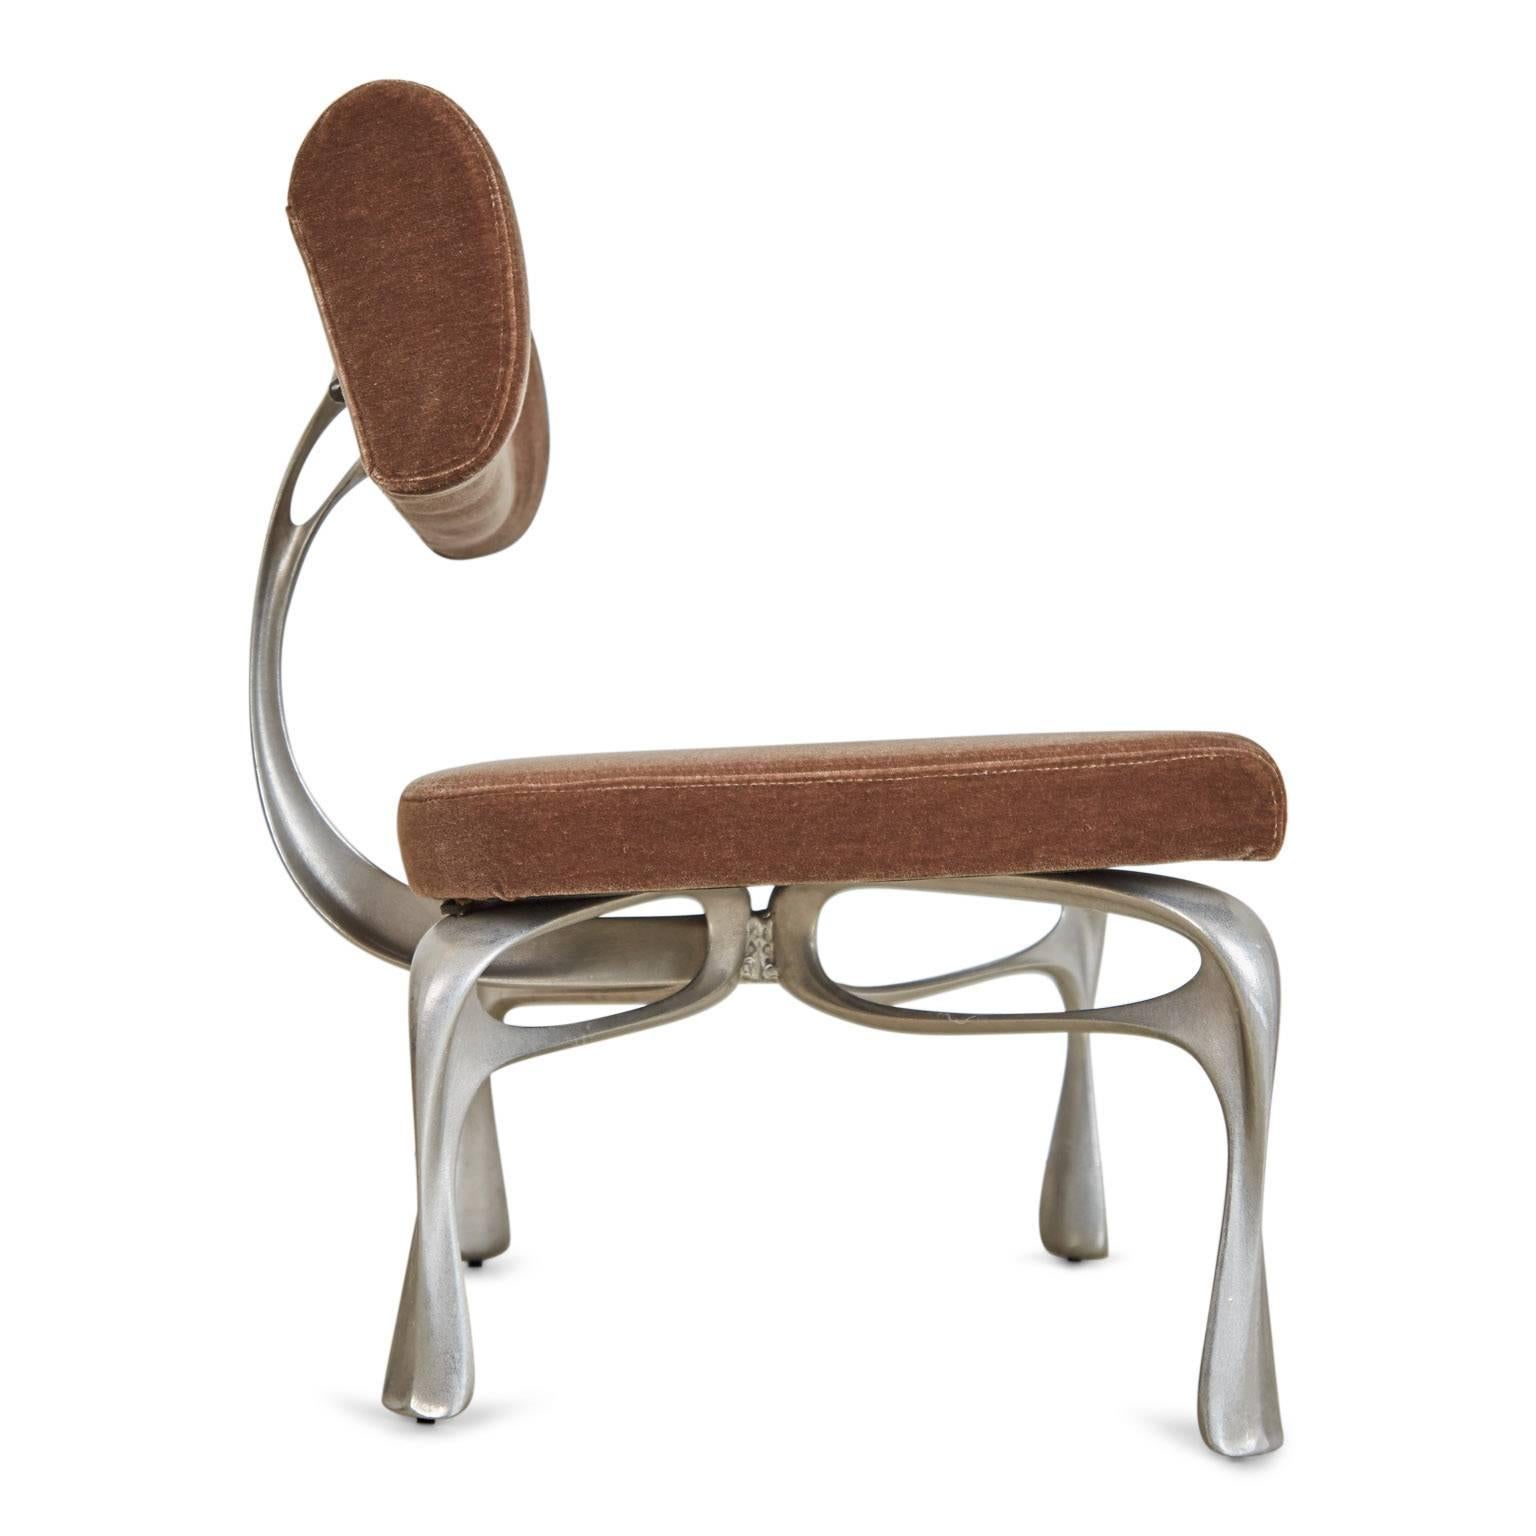 American Jordan Mozer Prototype Victory Lounge Chair from Artists Collection